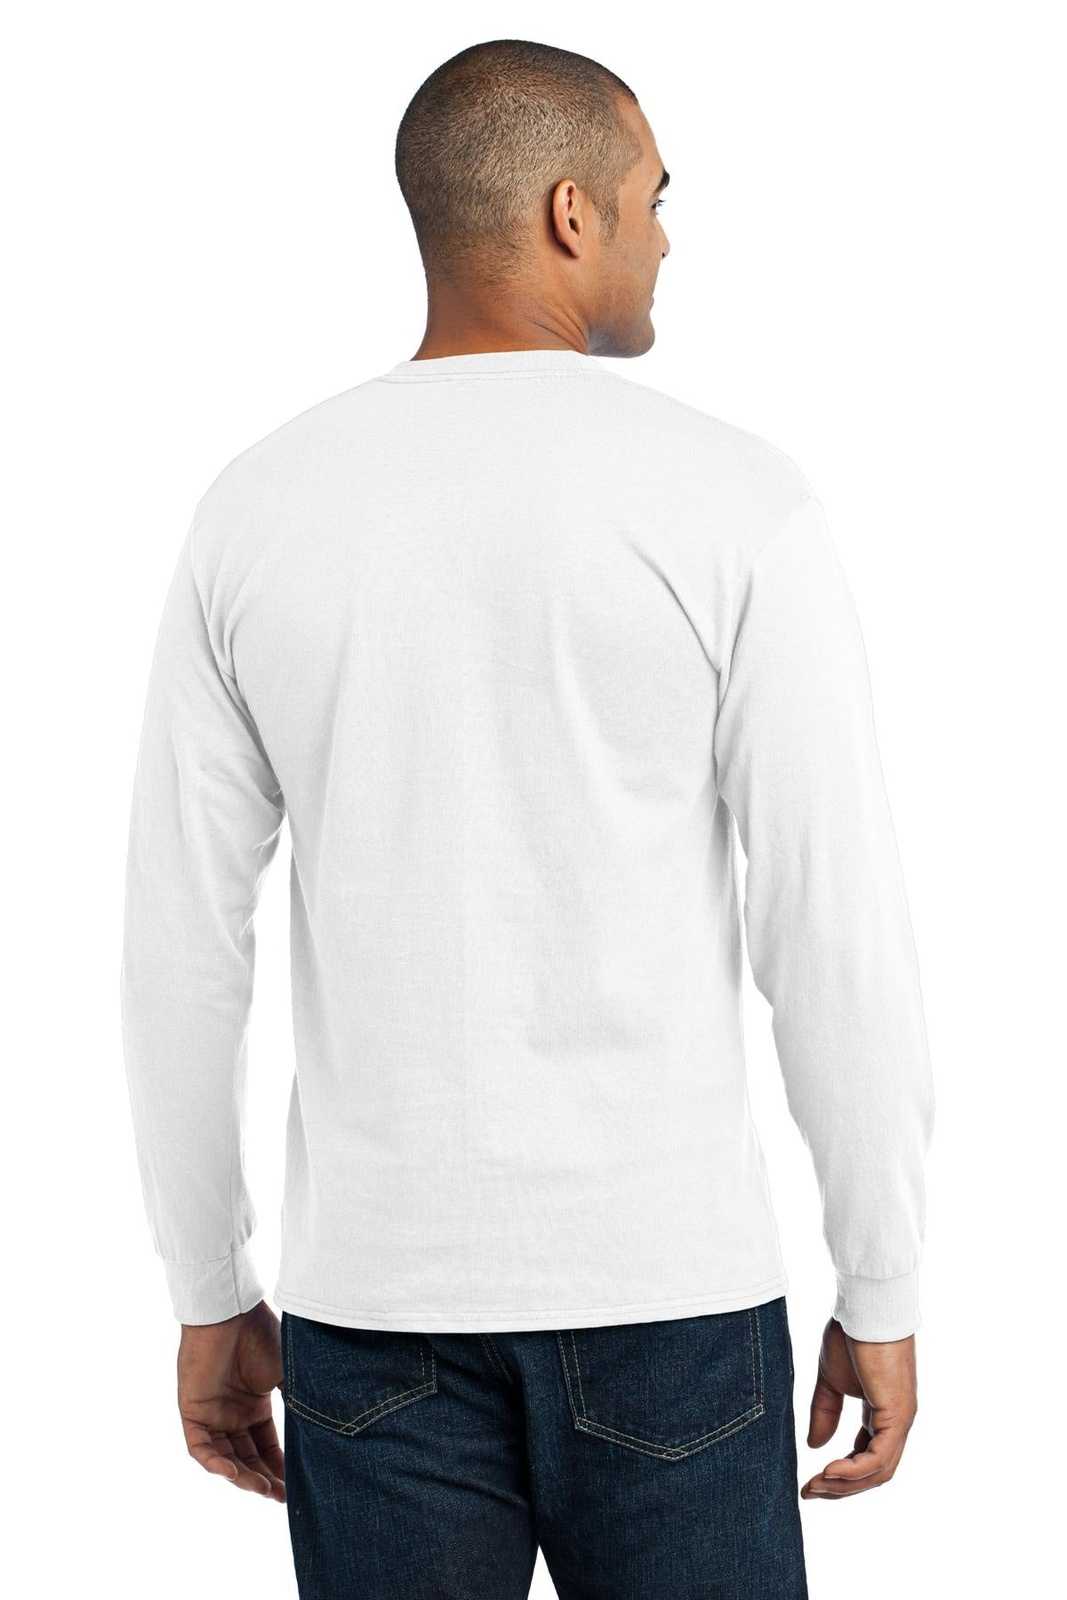 Port & Company PC55LS Long Sleeve Core Blend Tee - White - HIT a Double - 1